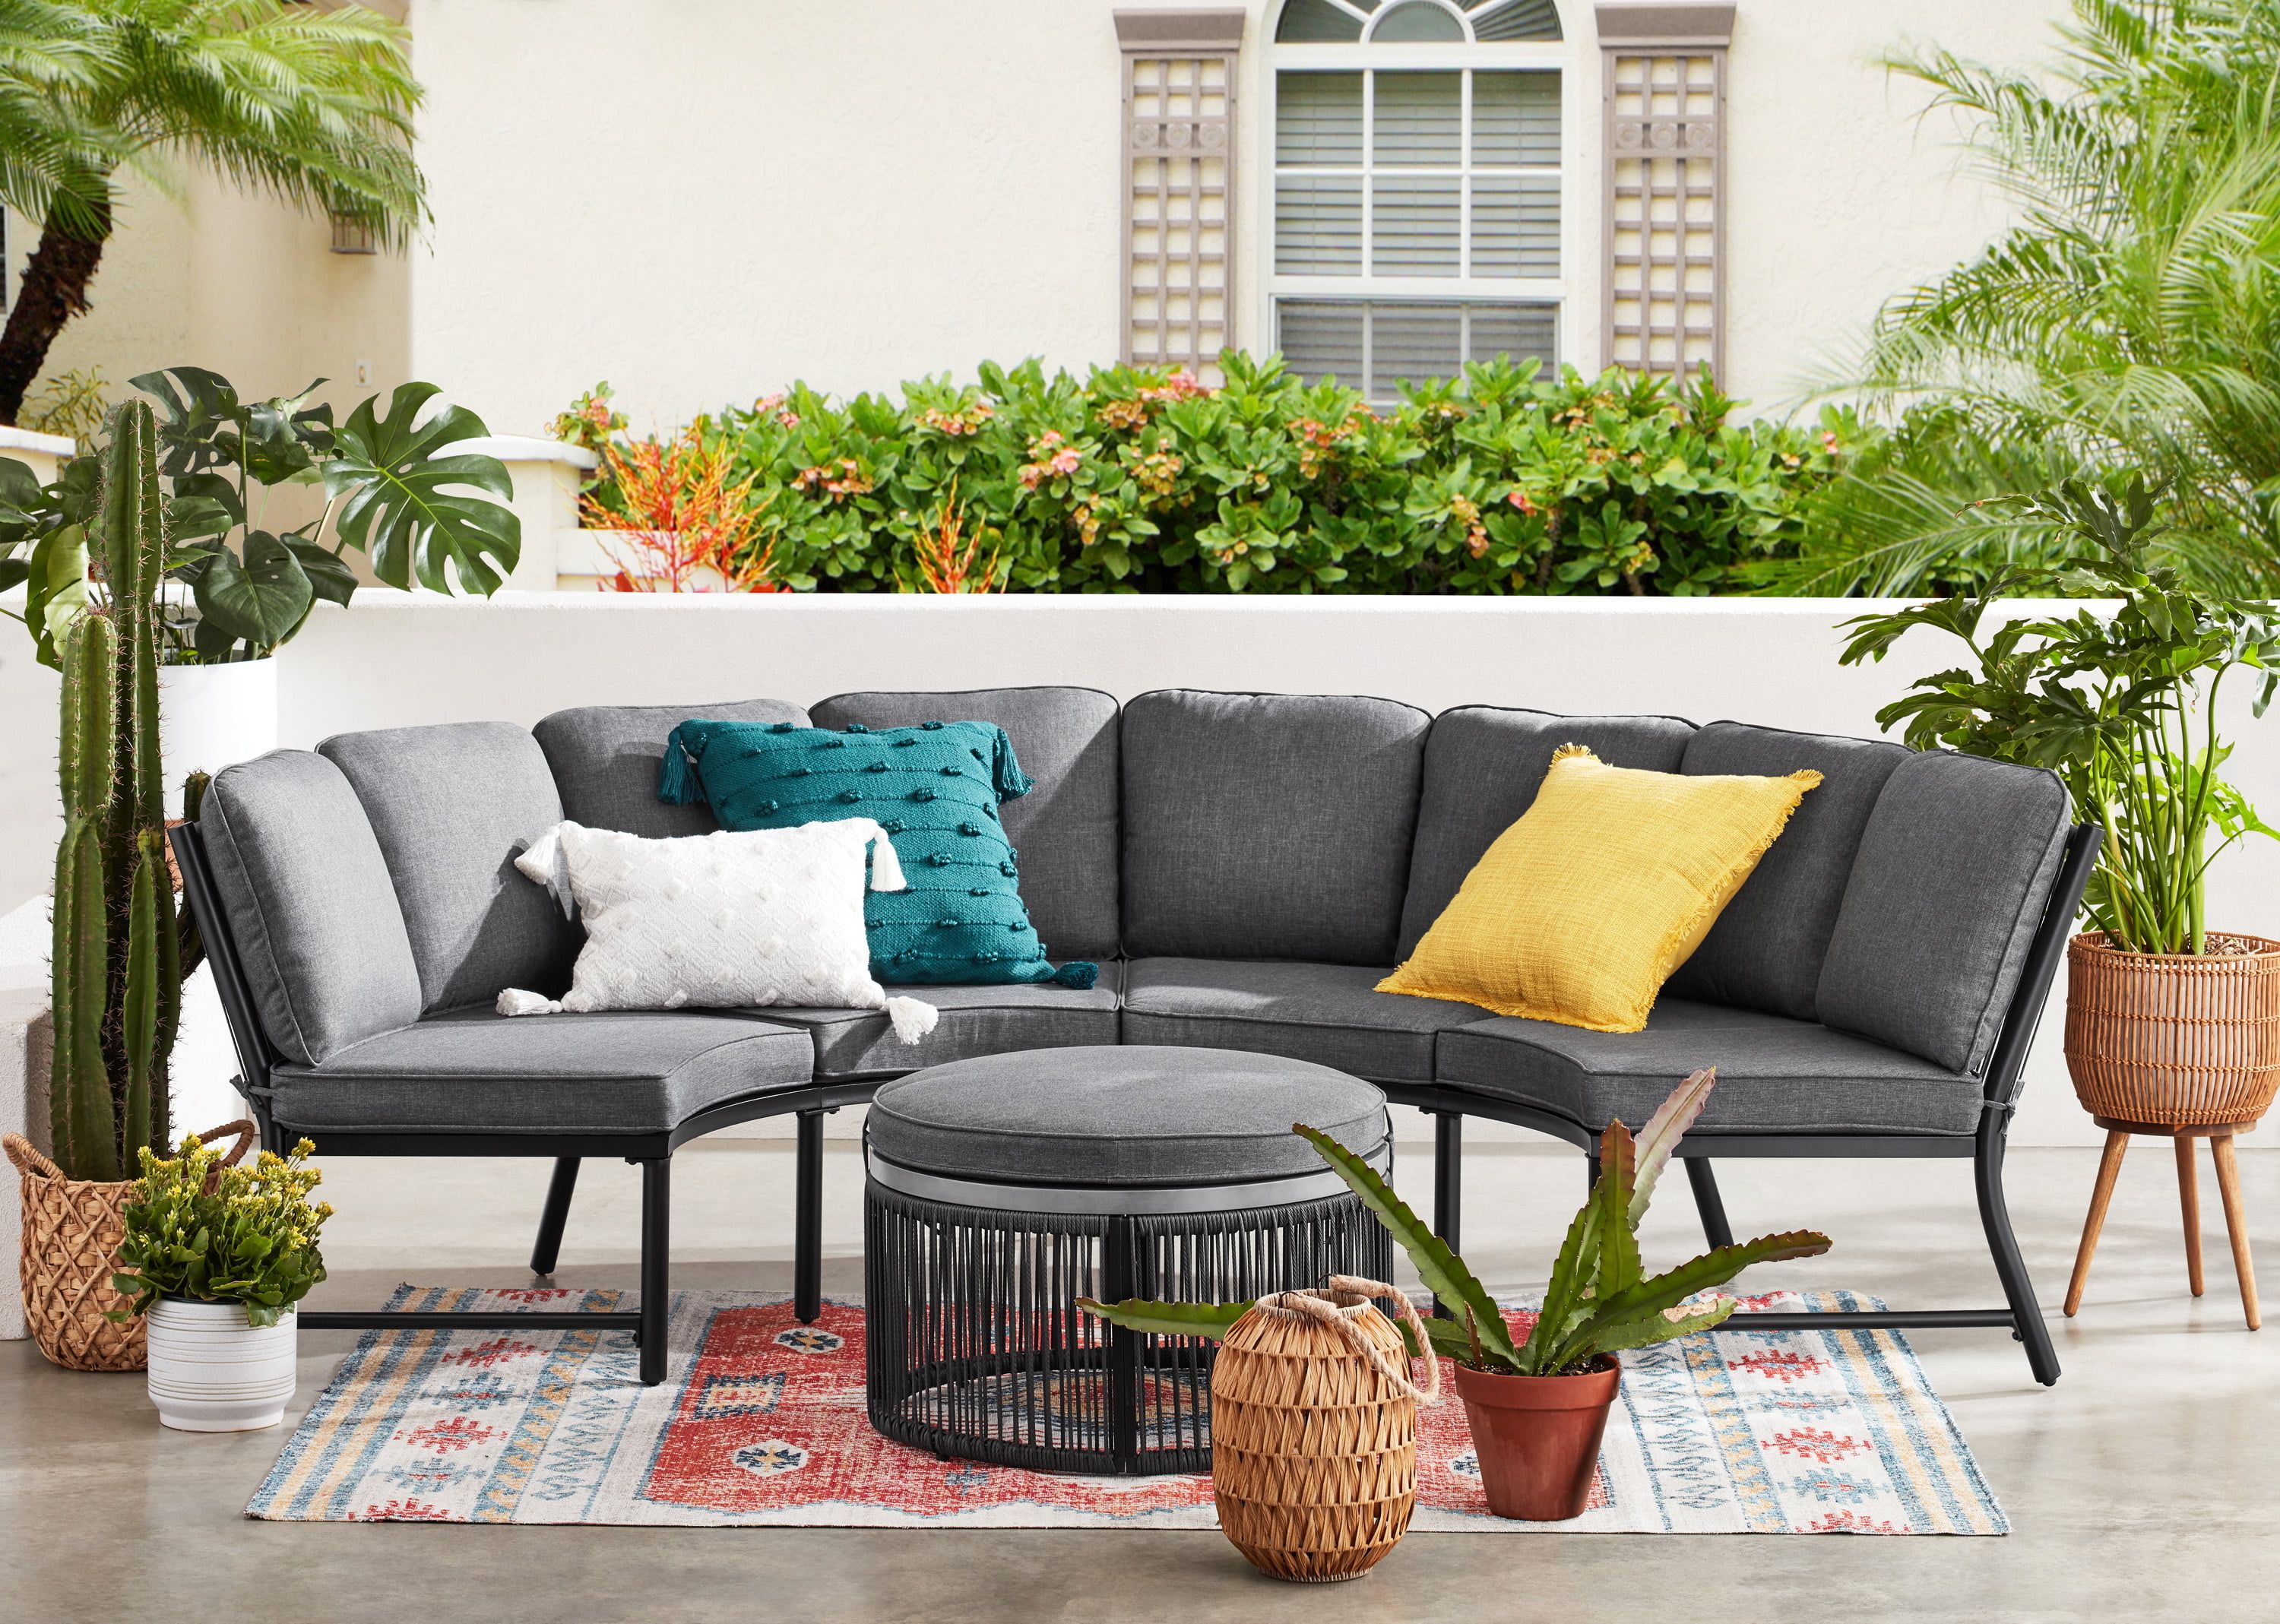 Current Mainstays Lawson Ridge 3 Piece Curved Sectional Set – Walmart Intended For 3 Piece Curved Sectional Set (View 3 of 15)